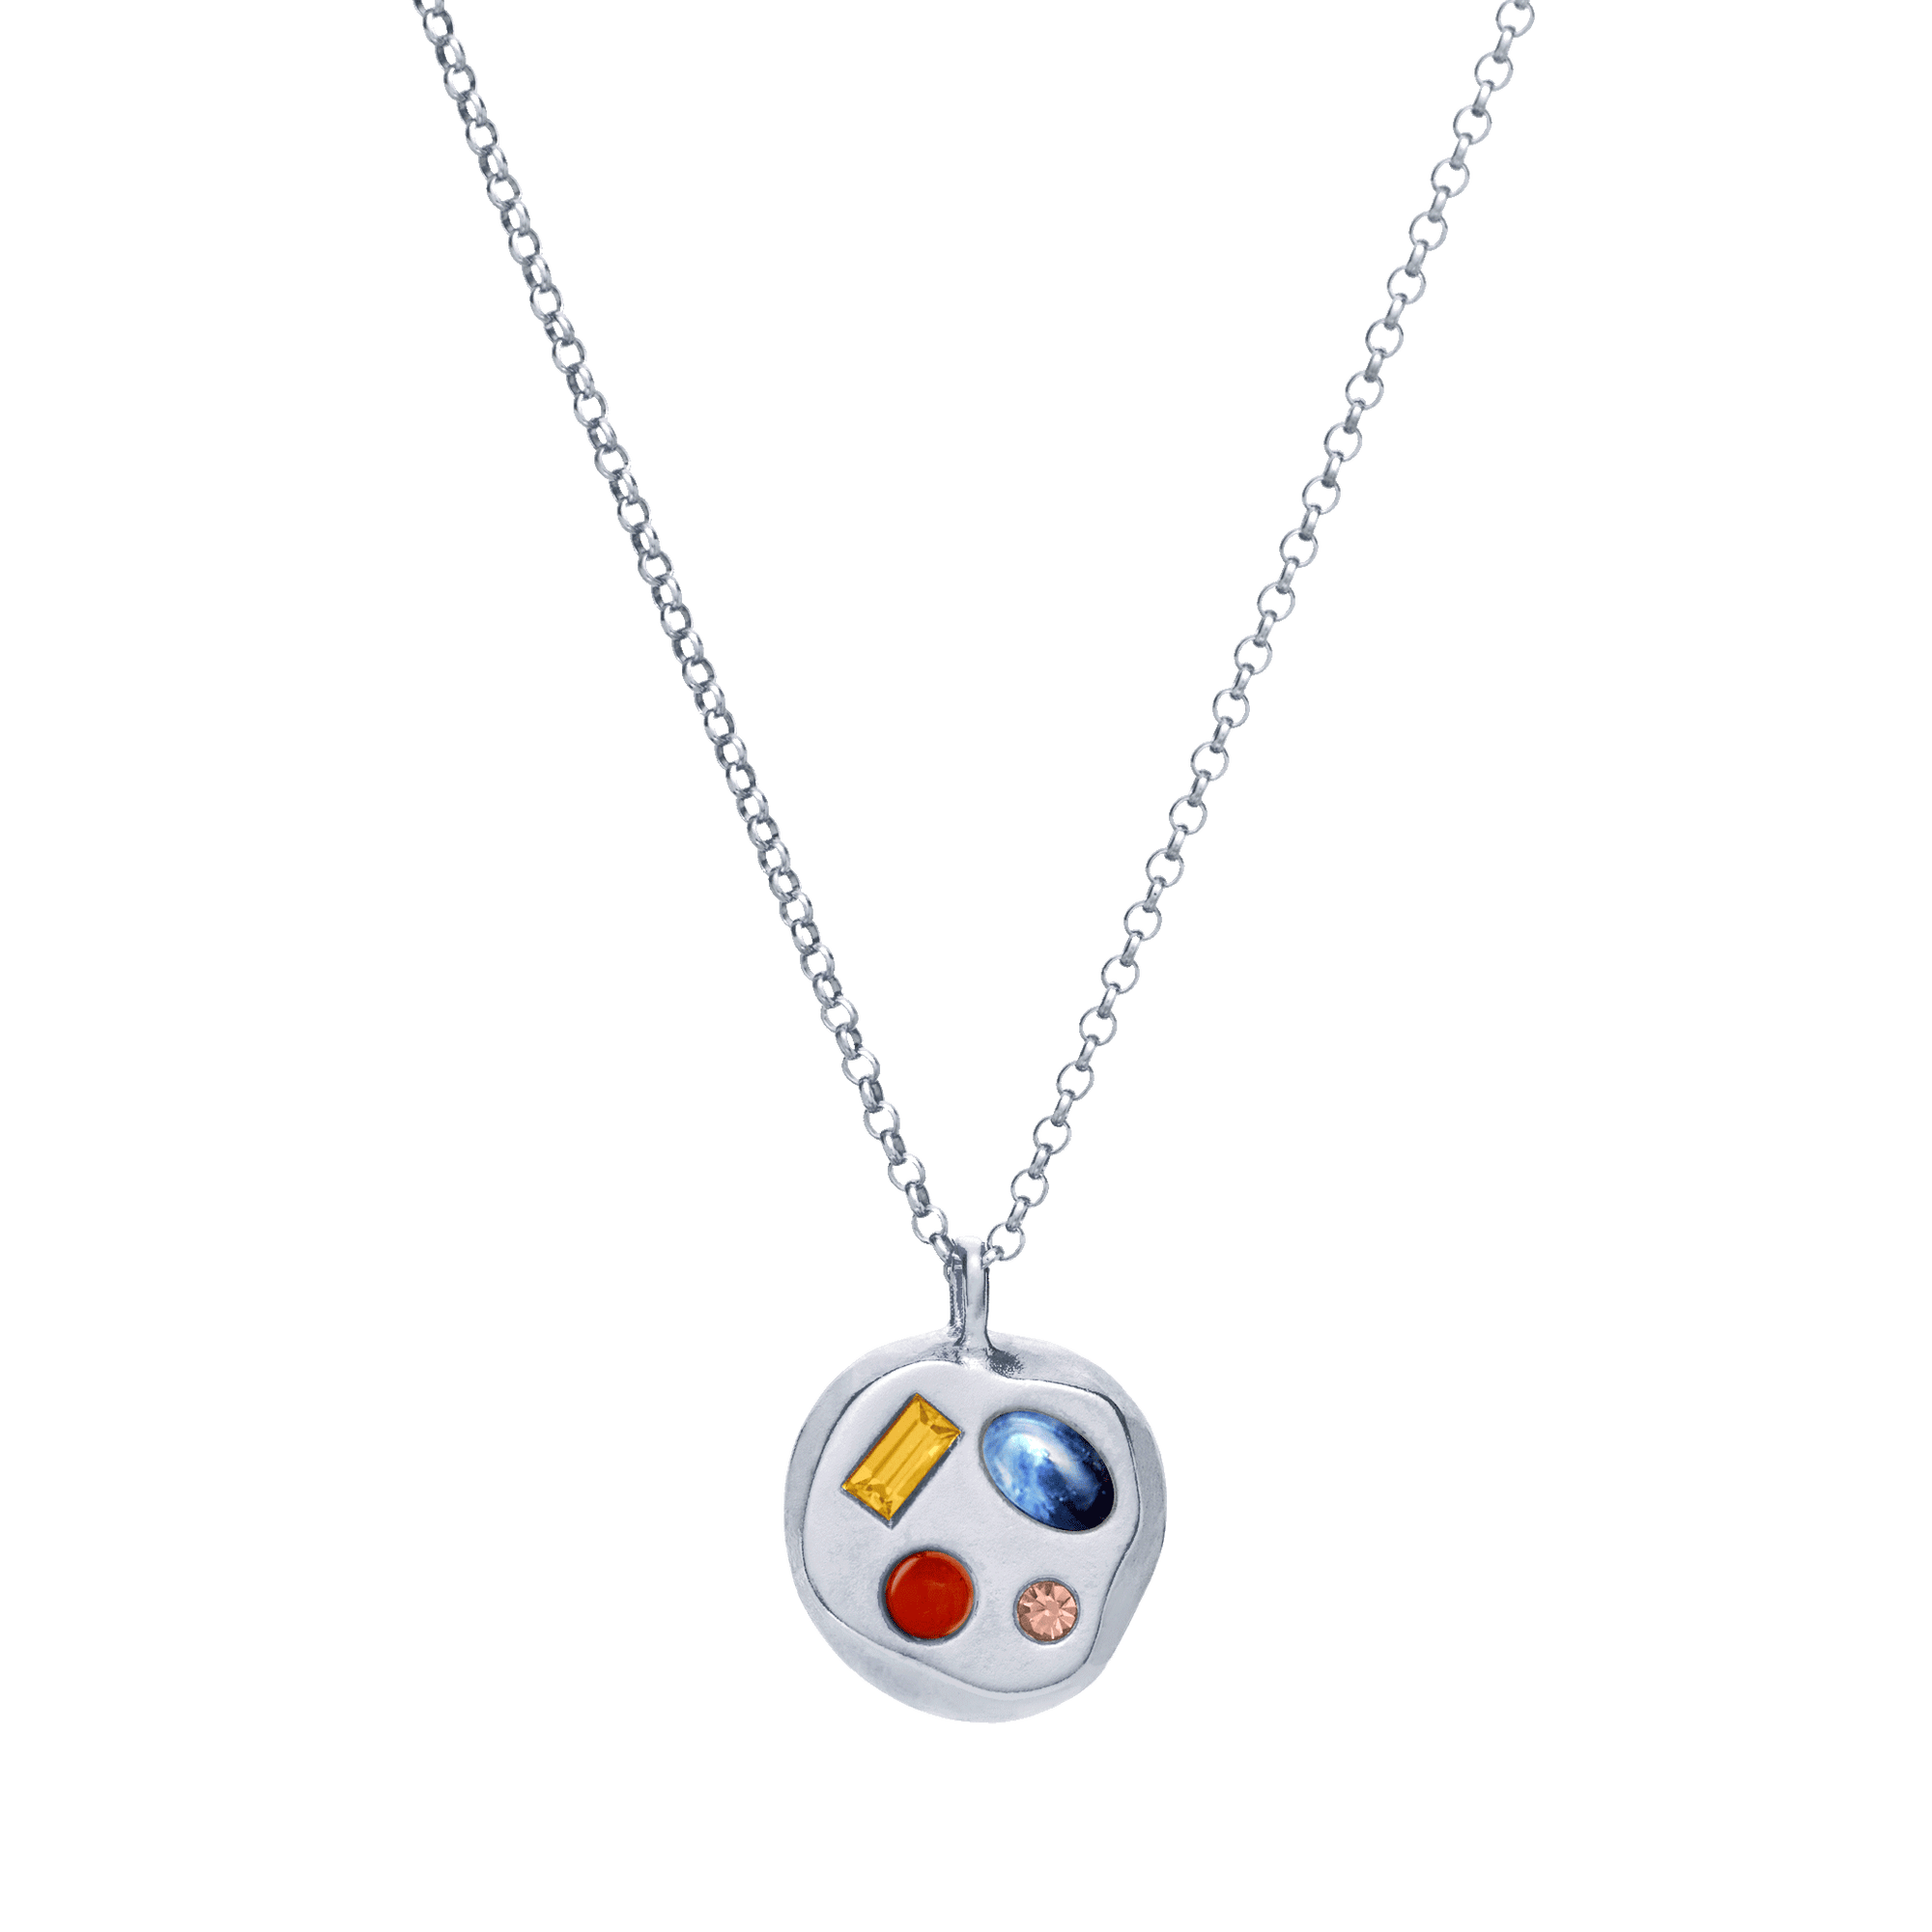 The November Nineteenth Pendant in Sterling Silver